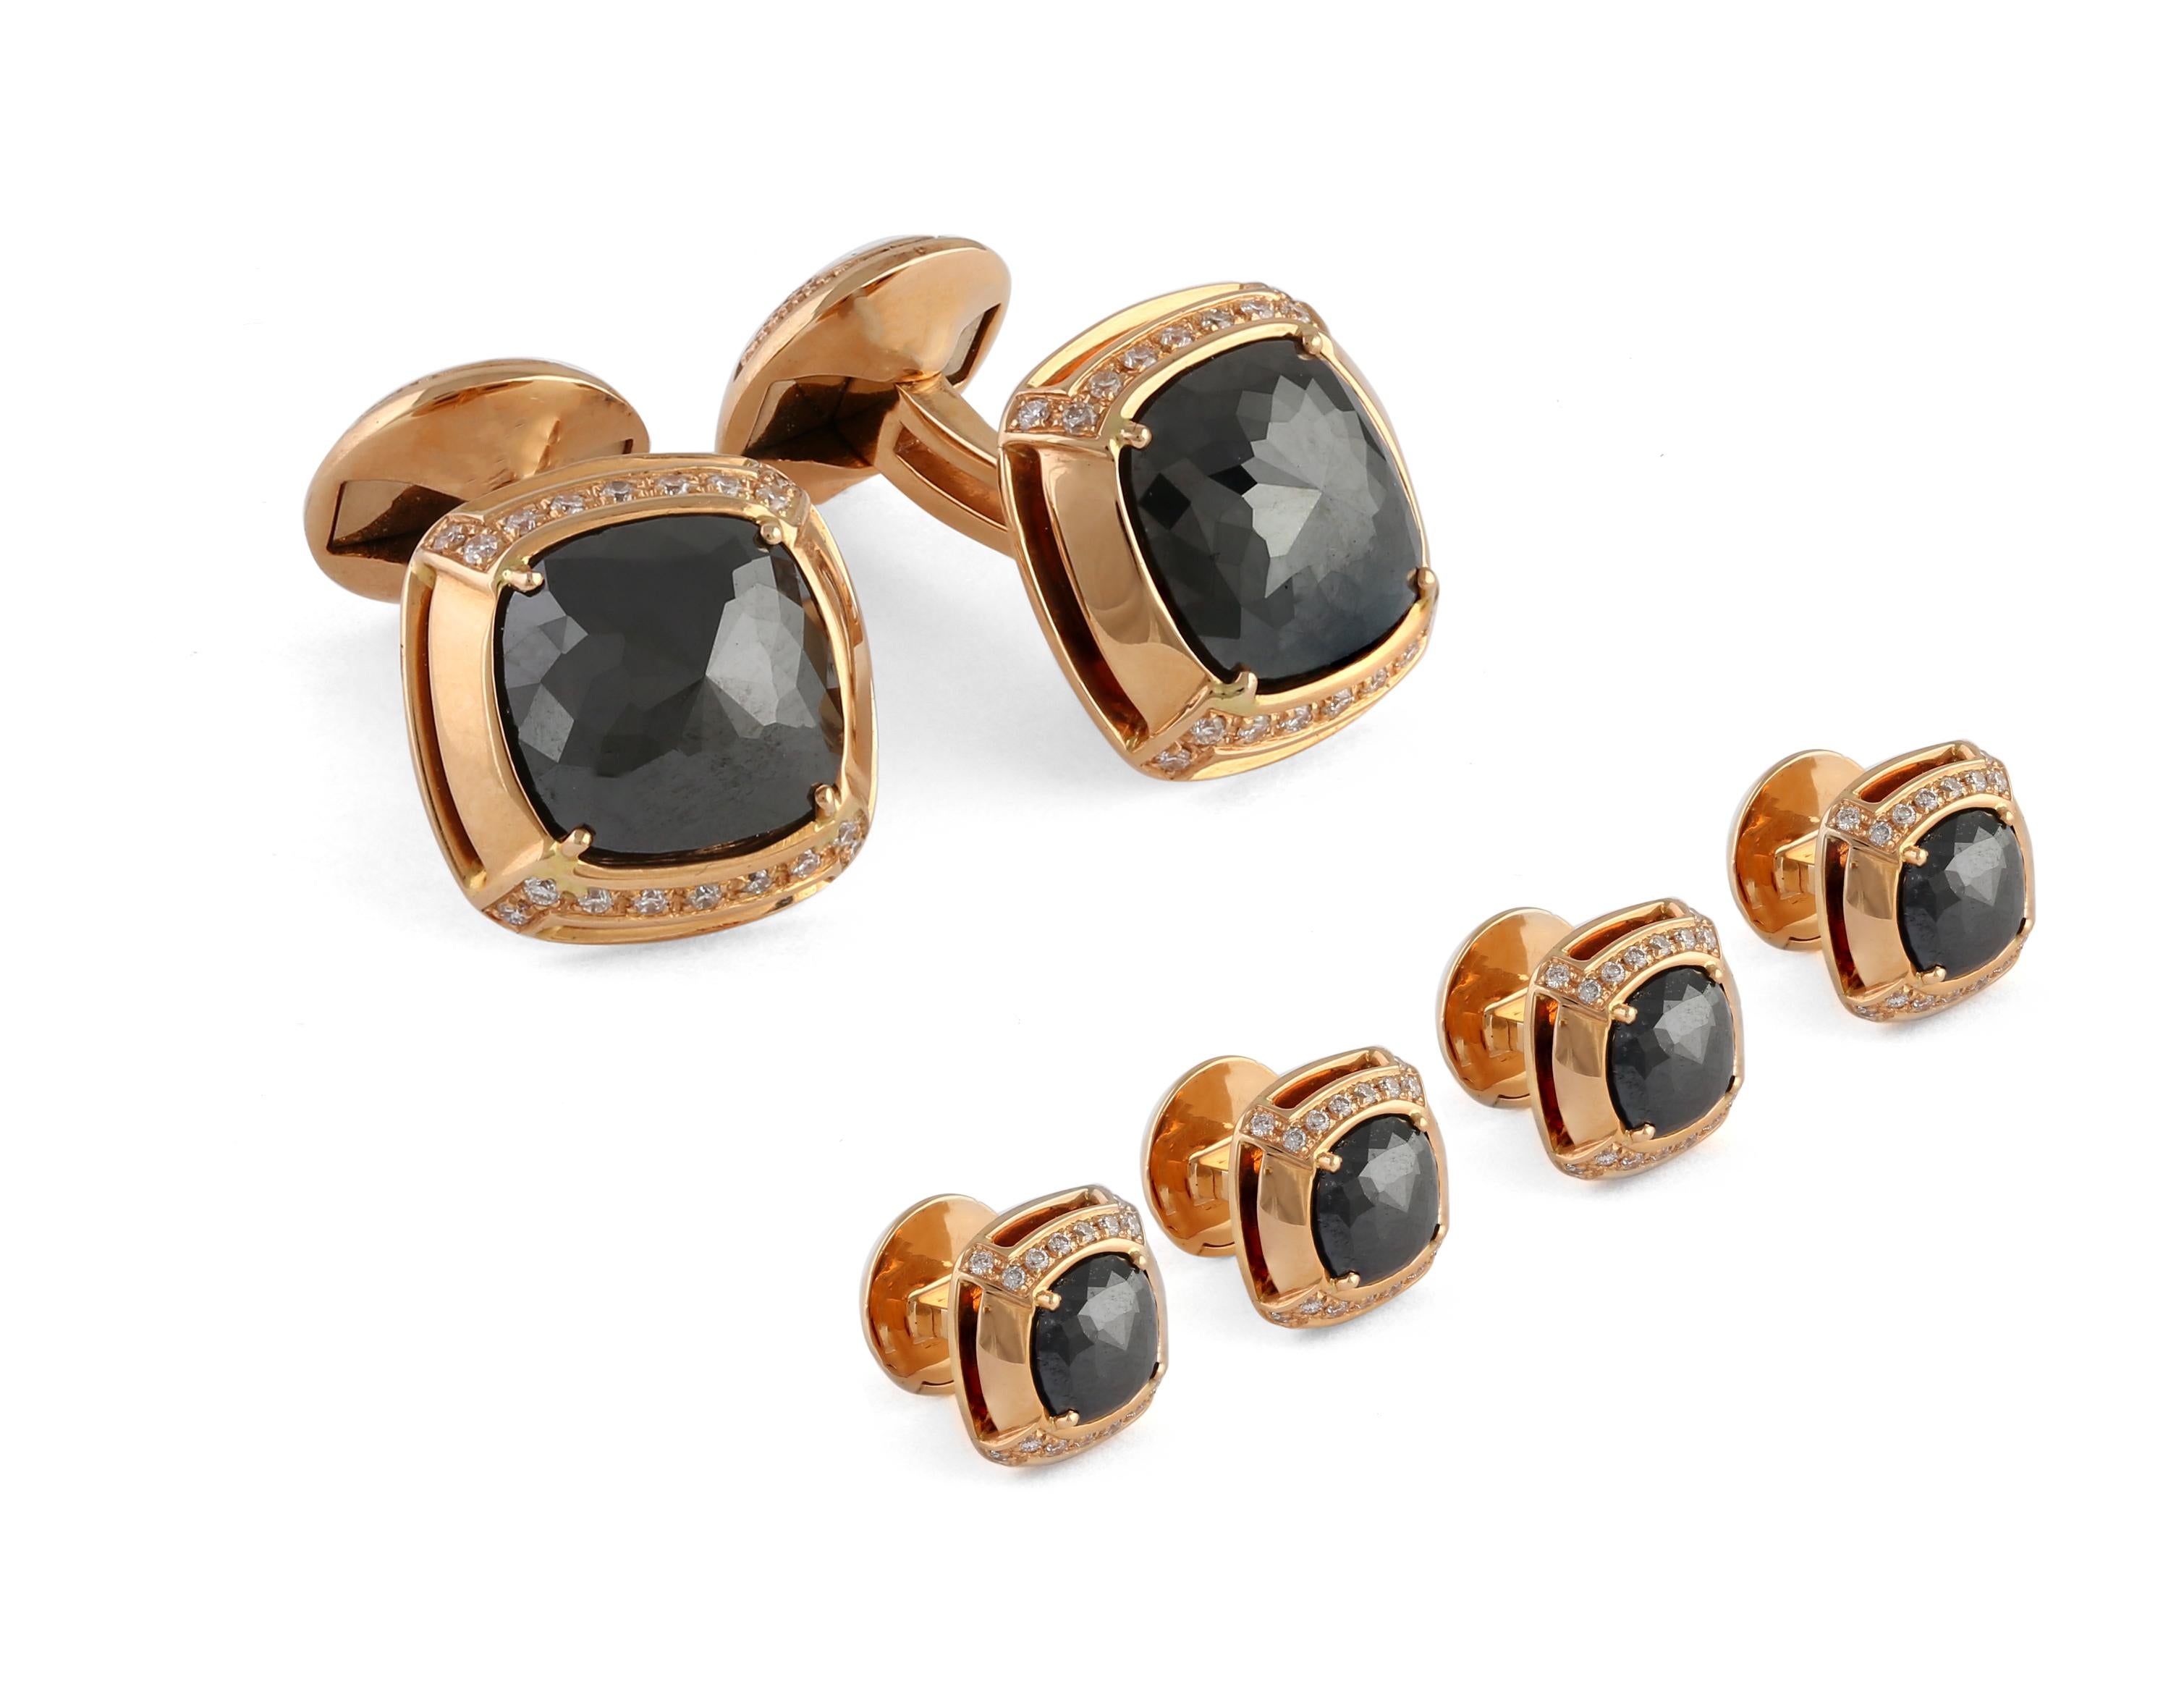 Extraordinary faceted black diamonds have been expertly cut and set within a frame style case, scattered with shining white diamonds to contrast with the deep black colouring of the diamond. A expertly set timeless collection, destined to be passed